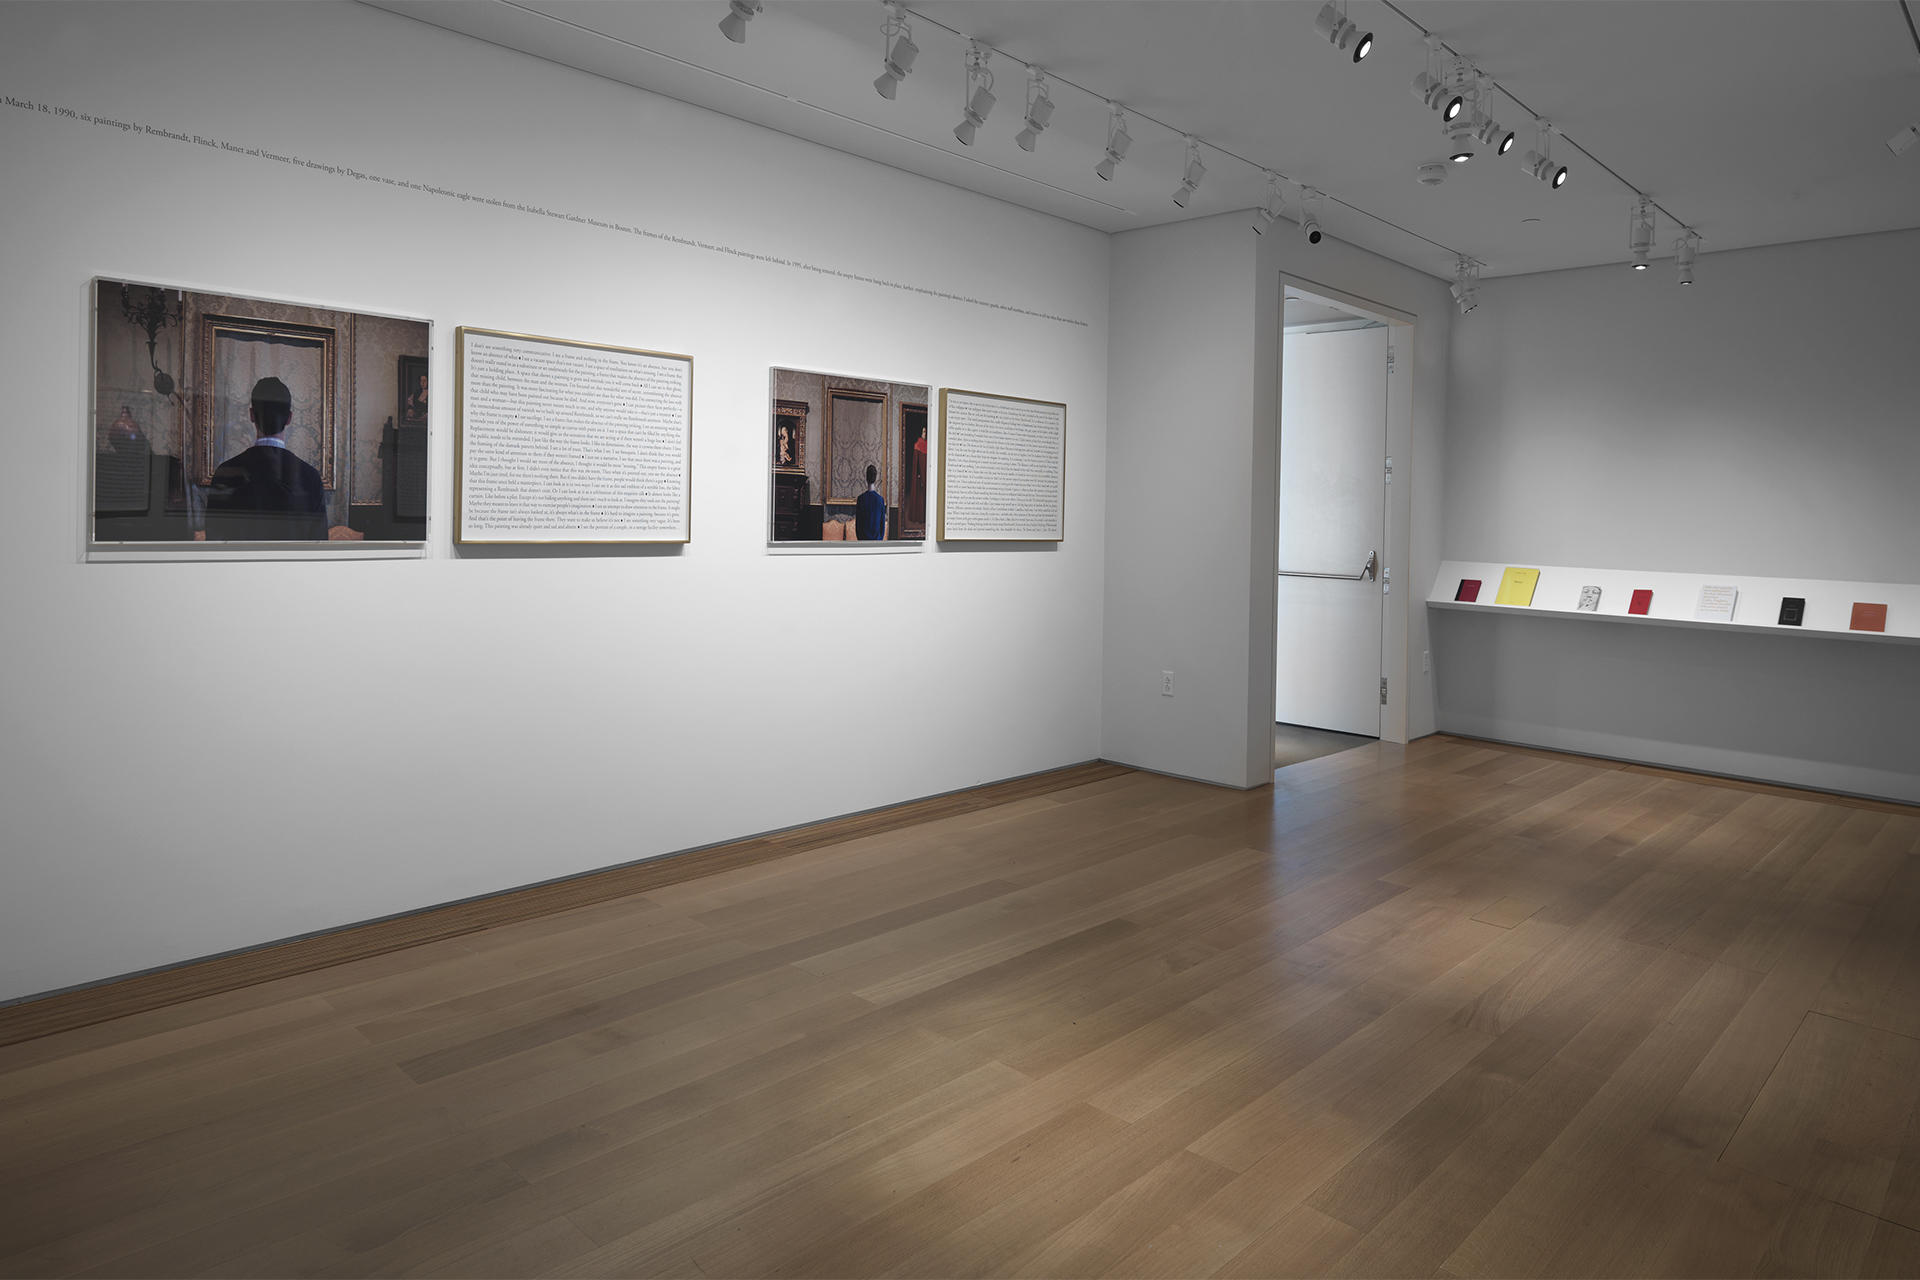 Sophie Calle: What Do You See?, installation view, ©2013 Sophie Calle / Artists Rights Society (ARS), New York / ADAGP, Paris. Courtesy of Sophie Calle, Paula Cooper Gallery, New York, and Isabella Stewart Gardner Museum, Boston.